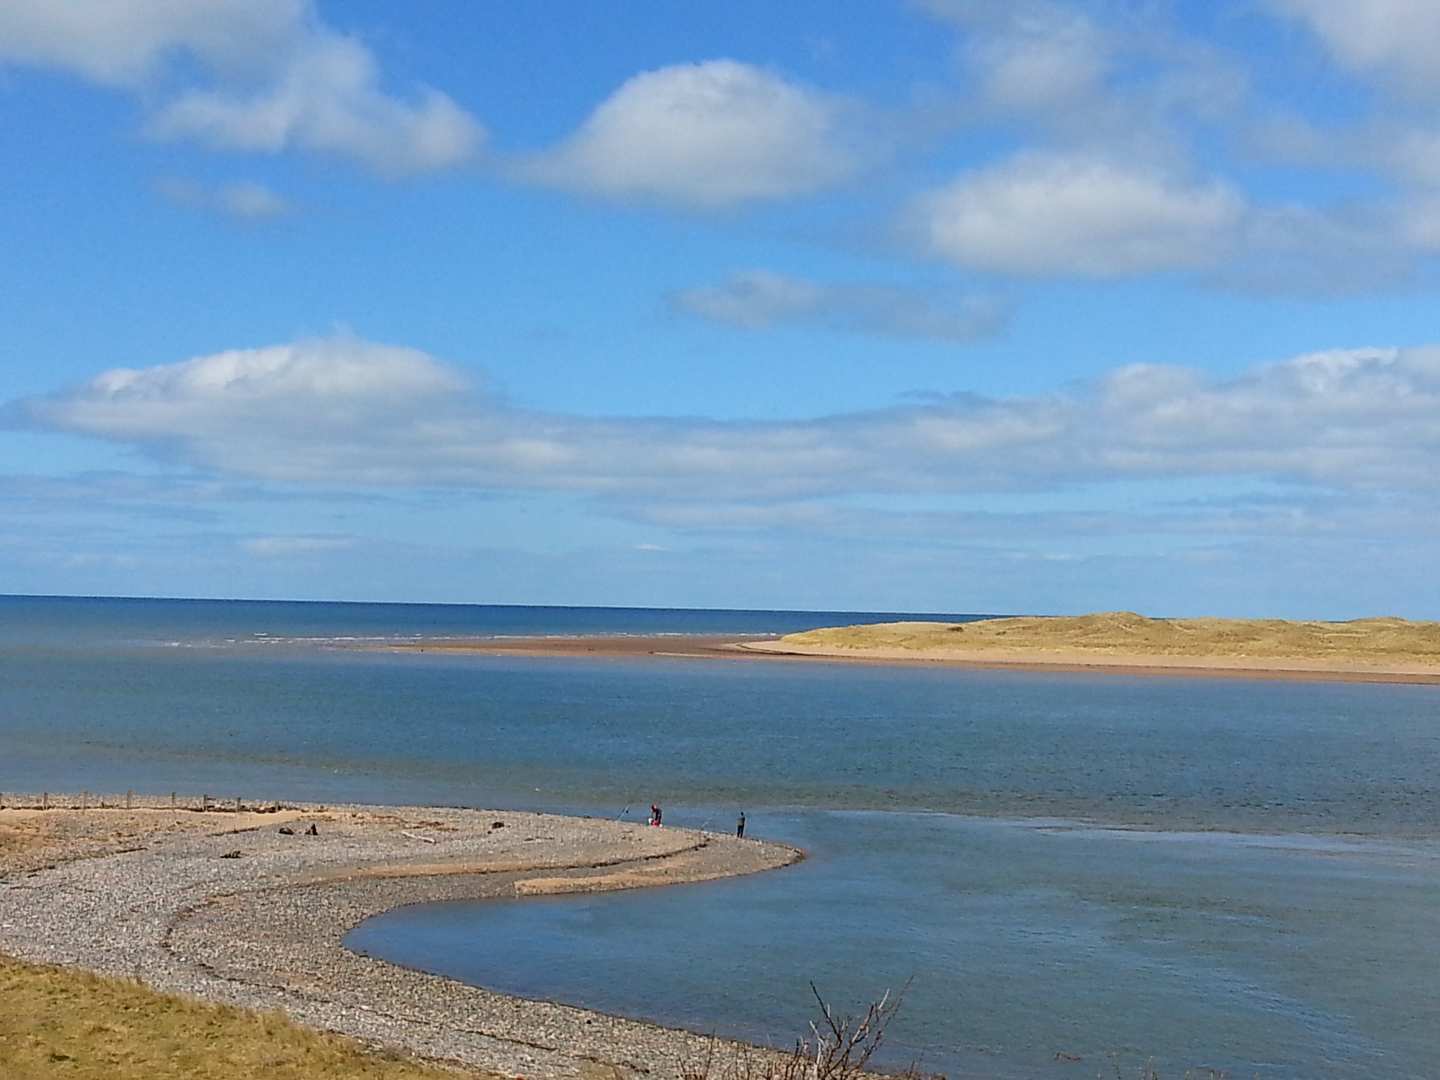 The seaside at Eskmeal Dunes, Cumbria, perfect for a walking holiday